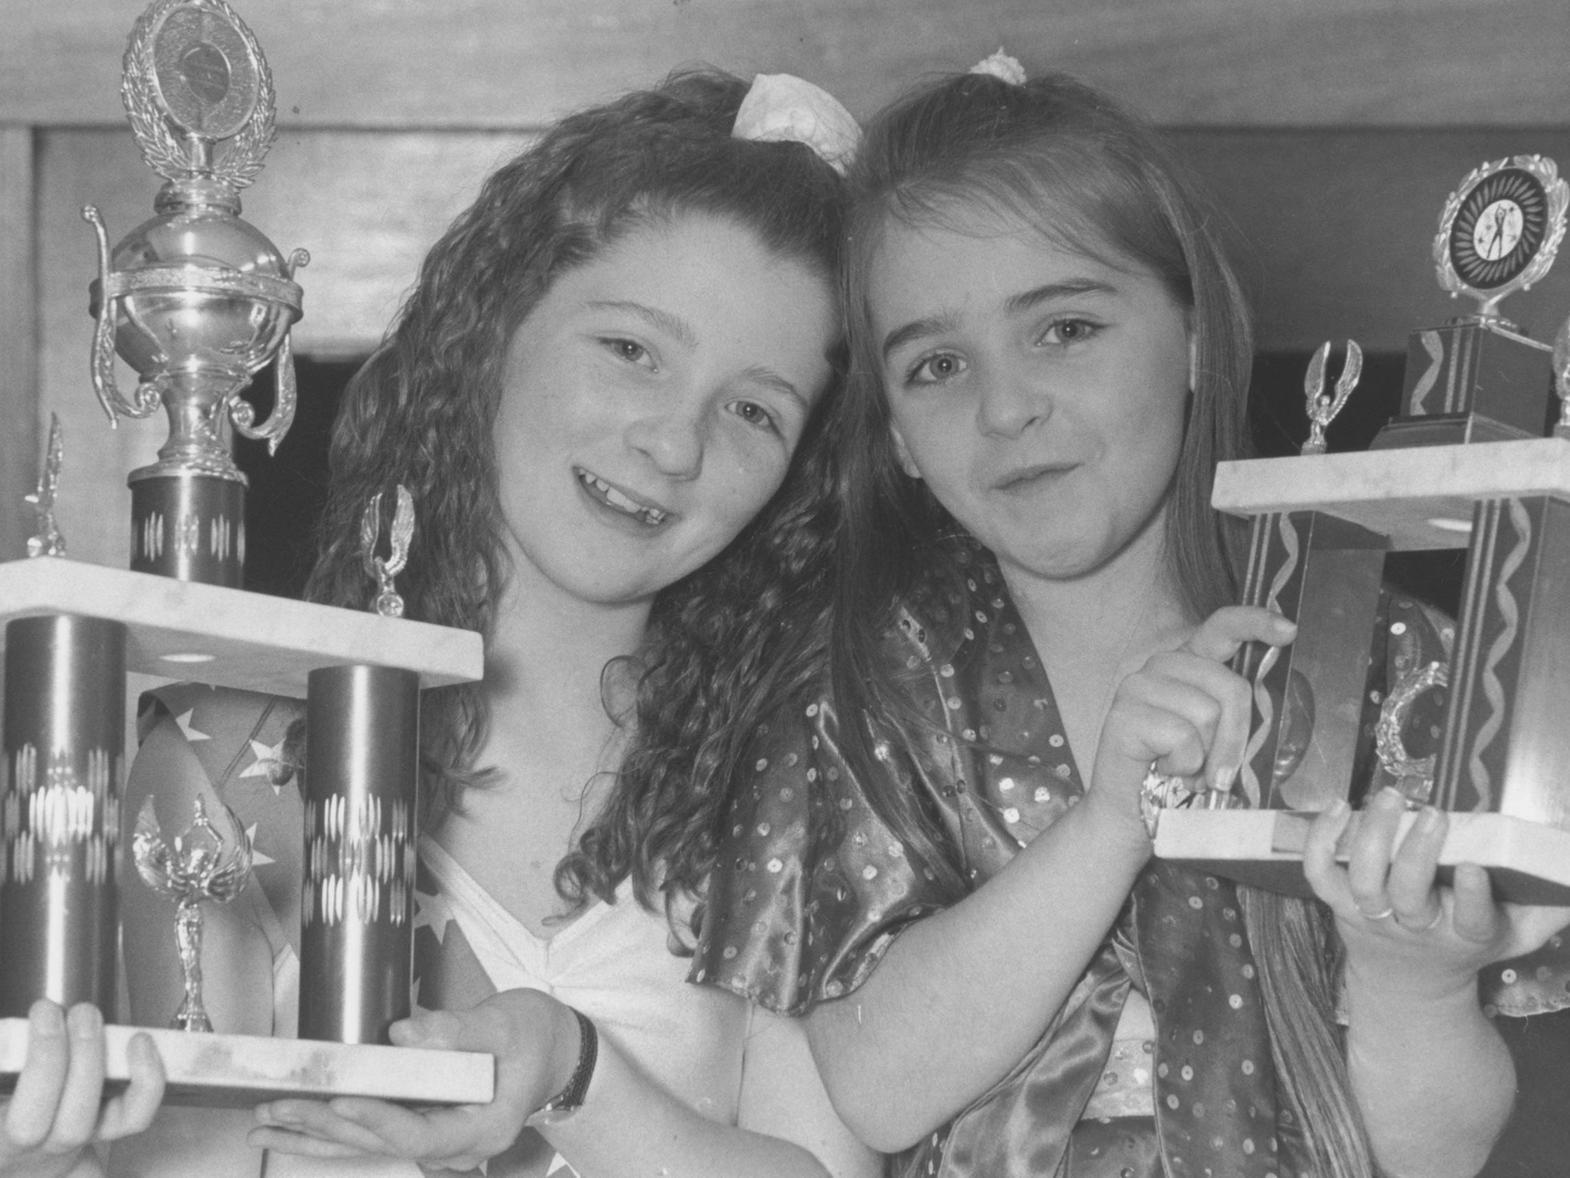 Sisters Stephanie MacDonald, right, and Hannah MacDonald won both the junior and senior Jazz Dancer of the Year awards at the YMCA back in October 1993.